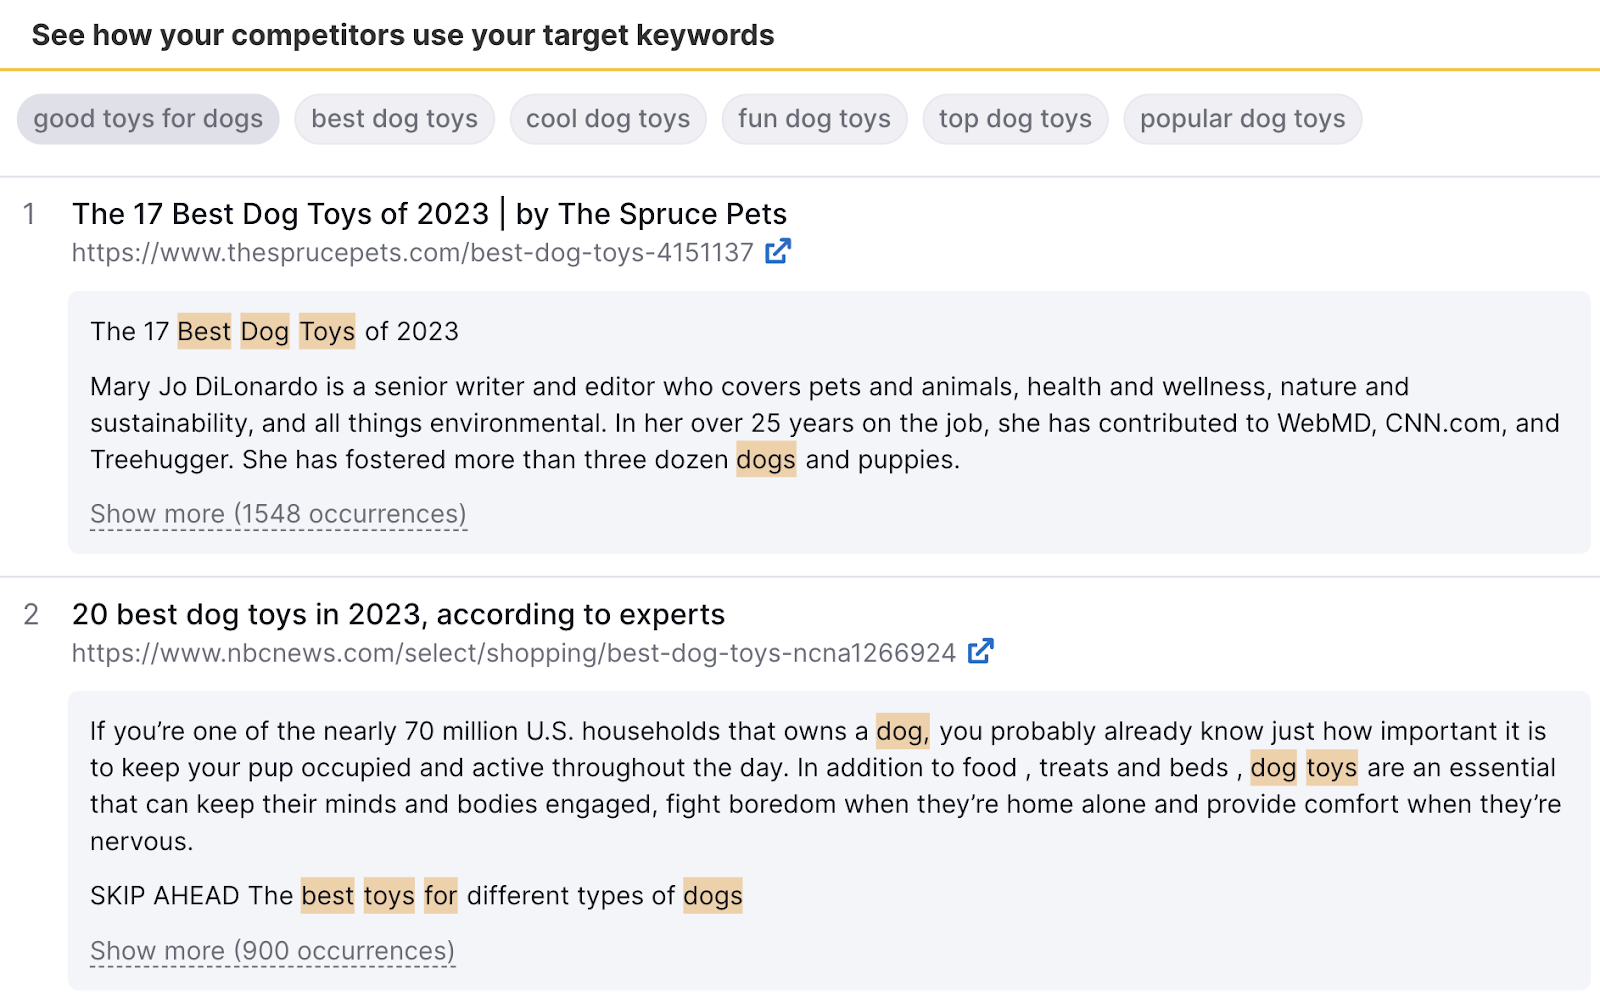 "See how your competitors use your target keywords" page